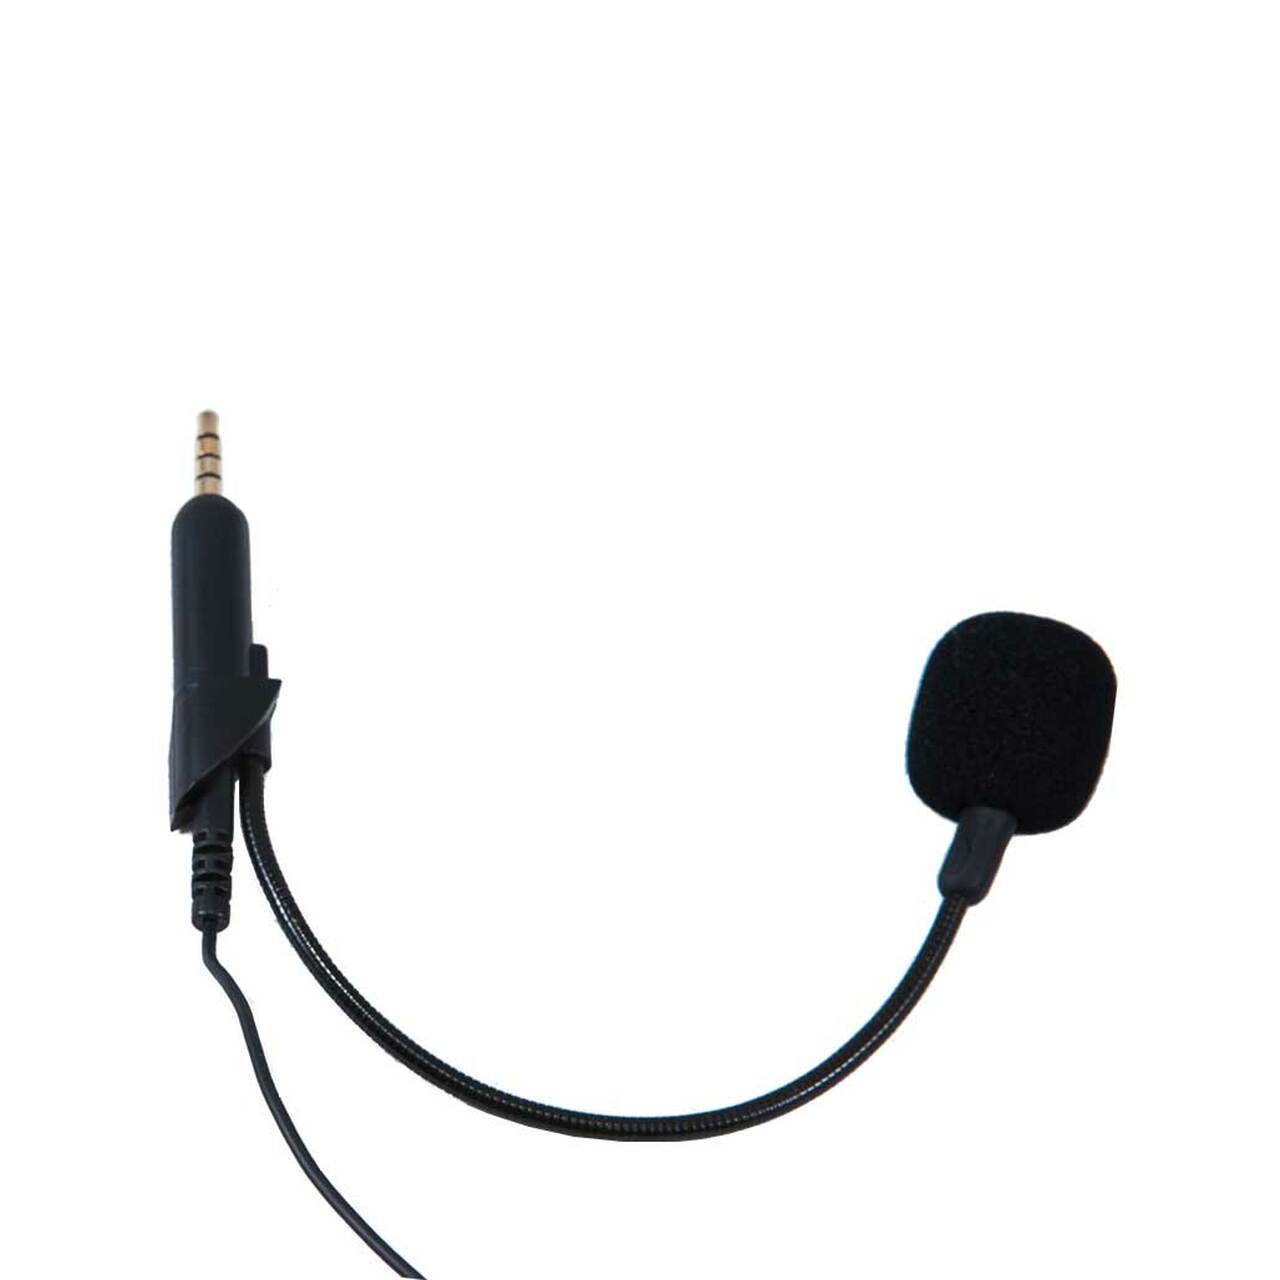 Headset Buddy ClearMic Plus 1 - Noise Cancelling Boom Mic for Bose QC15 Headphones